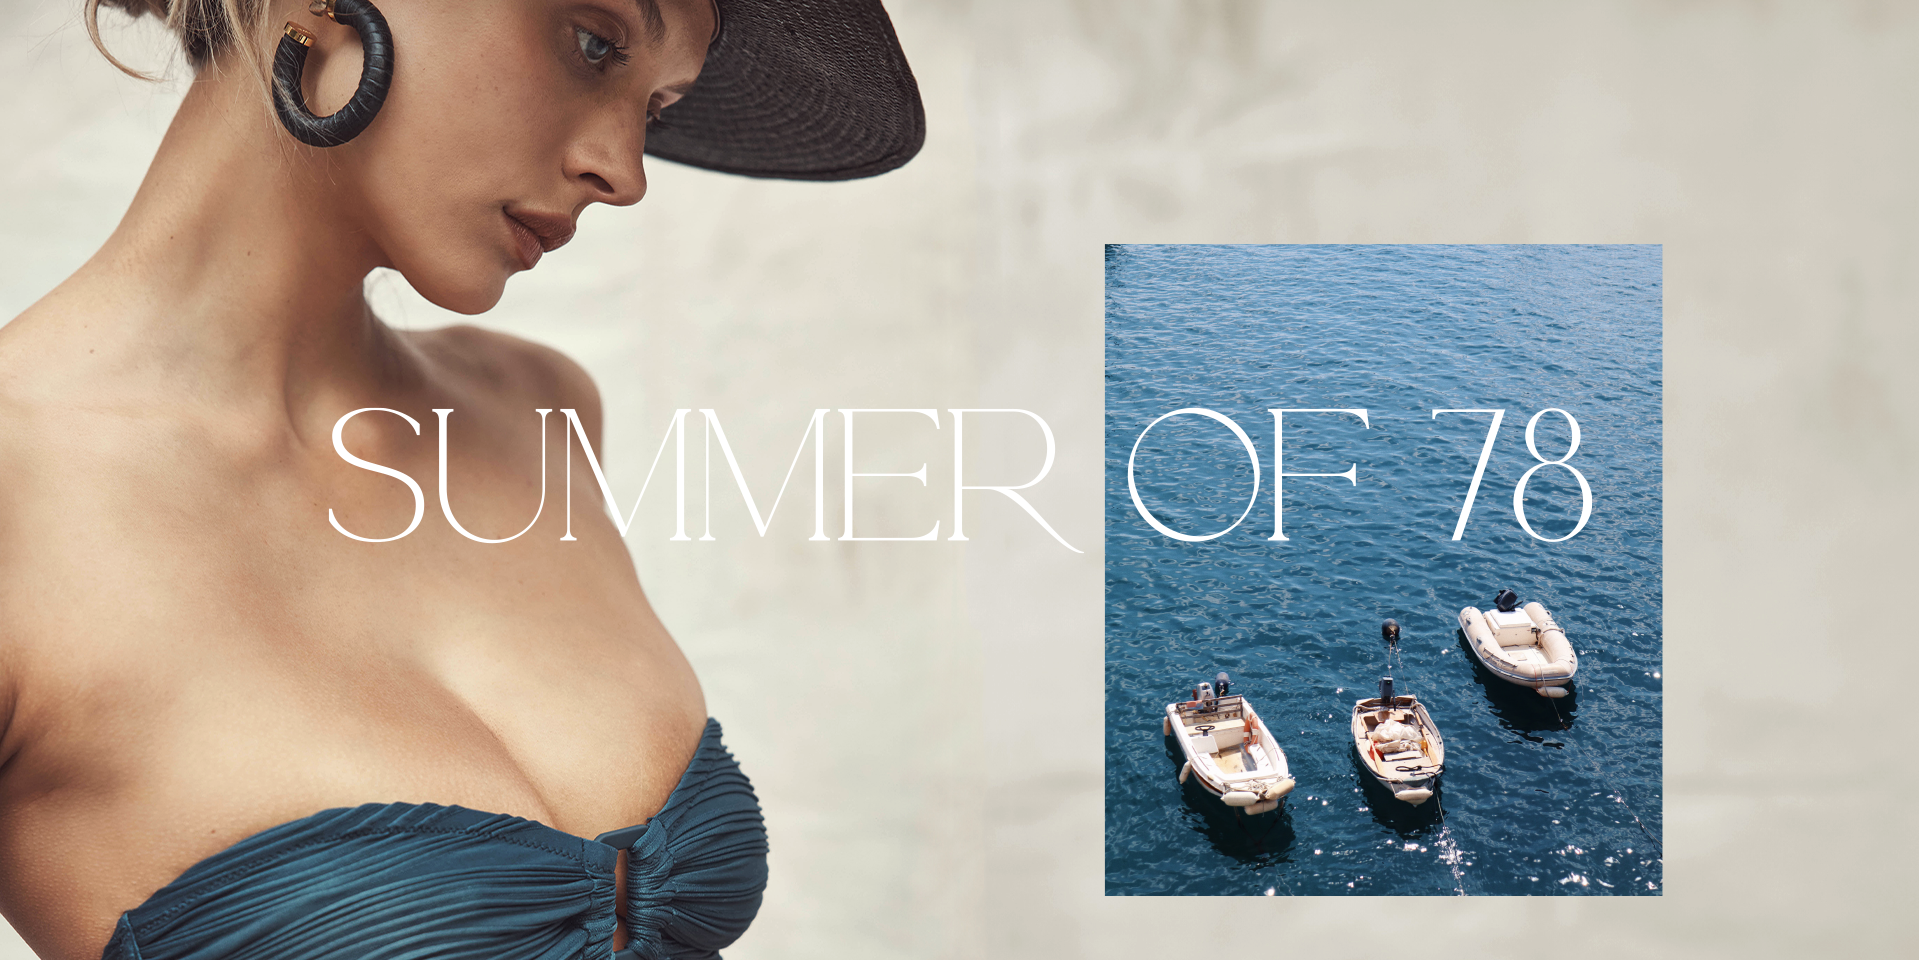 Summer of 78 Swim french wave one piece banner image